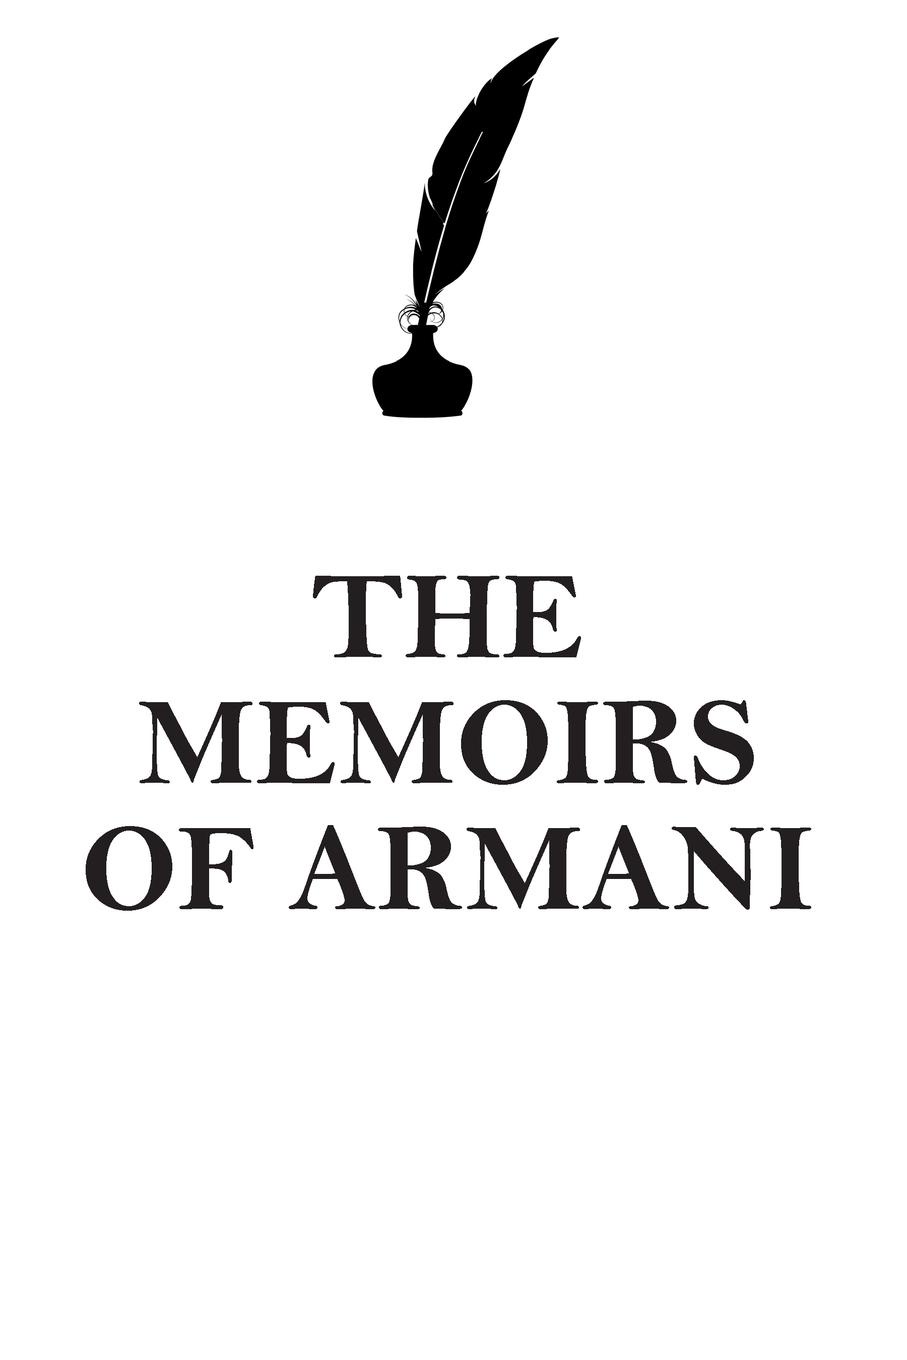 THE MEMOIRS OF  ARMANI AFFIRMATIONS WORKBOOK Positive Affirmations Workbook Includes. Mentoring Questions, Guidance, Supporting You